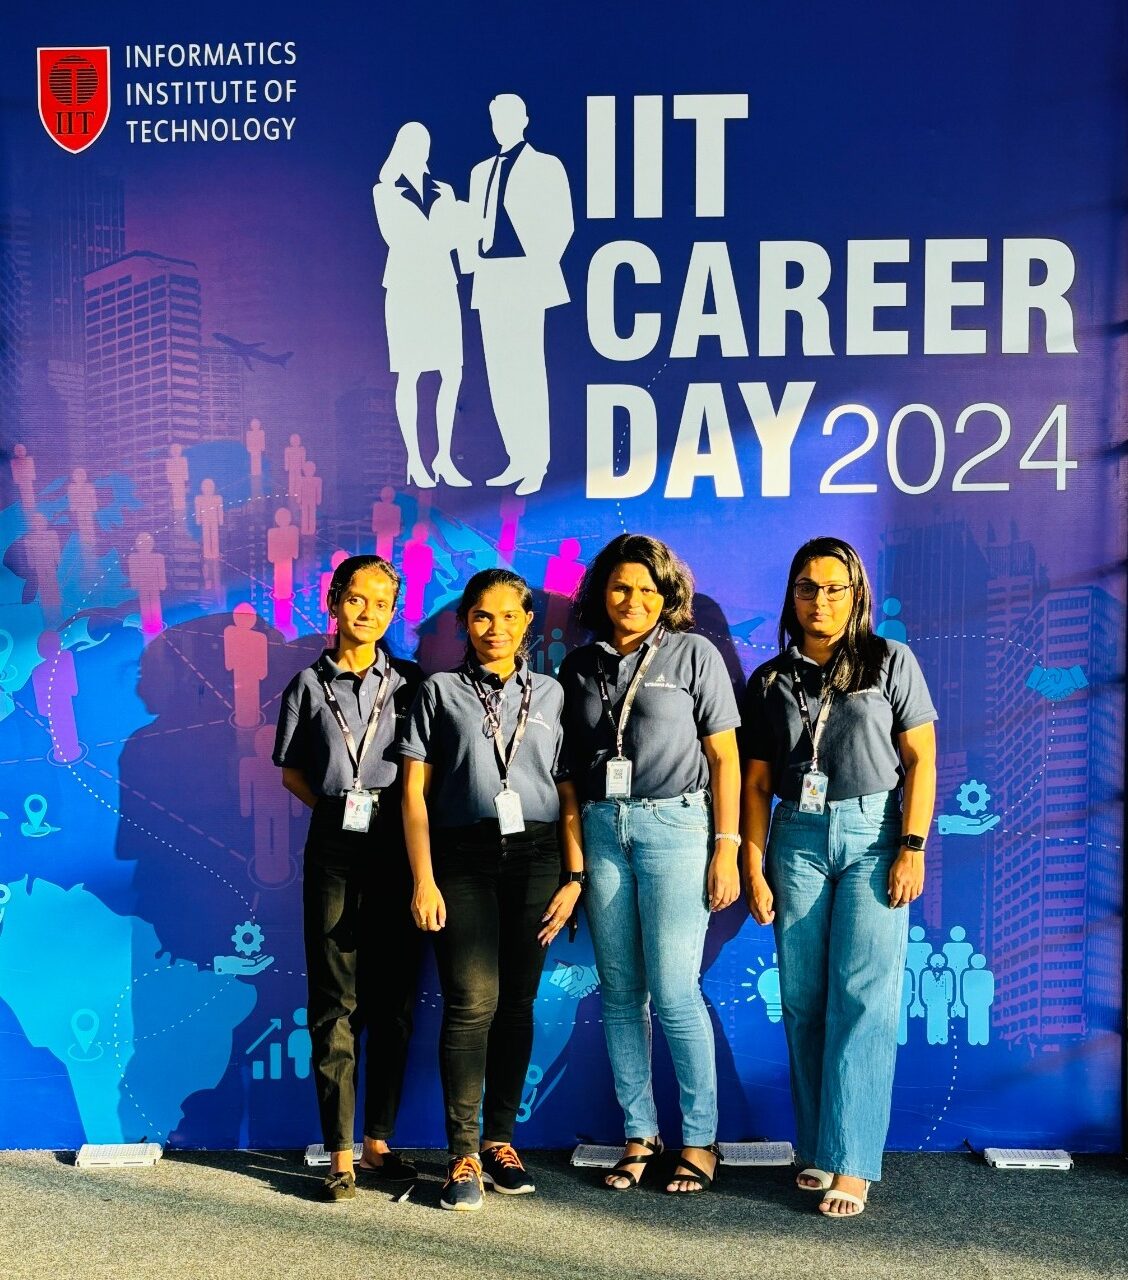 InTalent Asia’s Successful Participation at the IIT Career Fair: Nurturing Talent and Building a Skilled Workforce